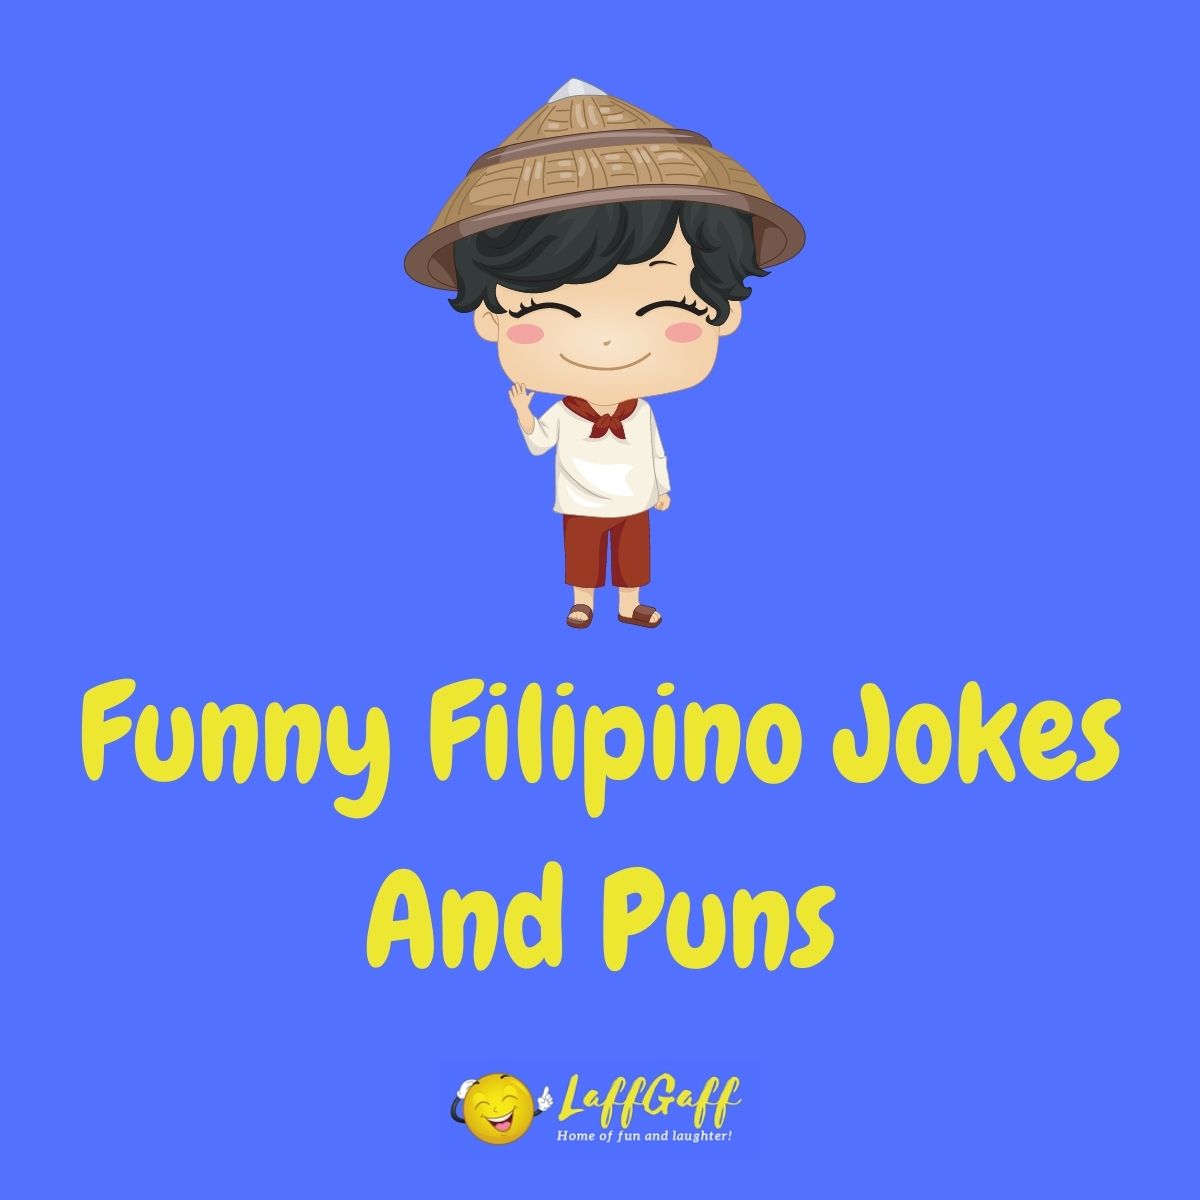 Featured image for a page of funny Filipino jokes and puns.